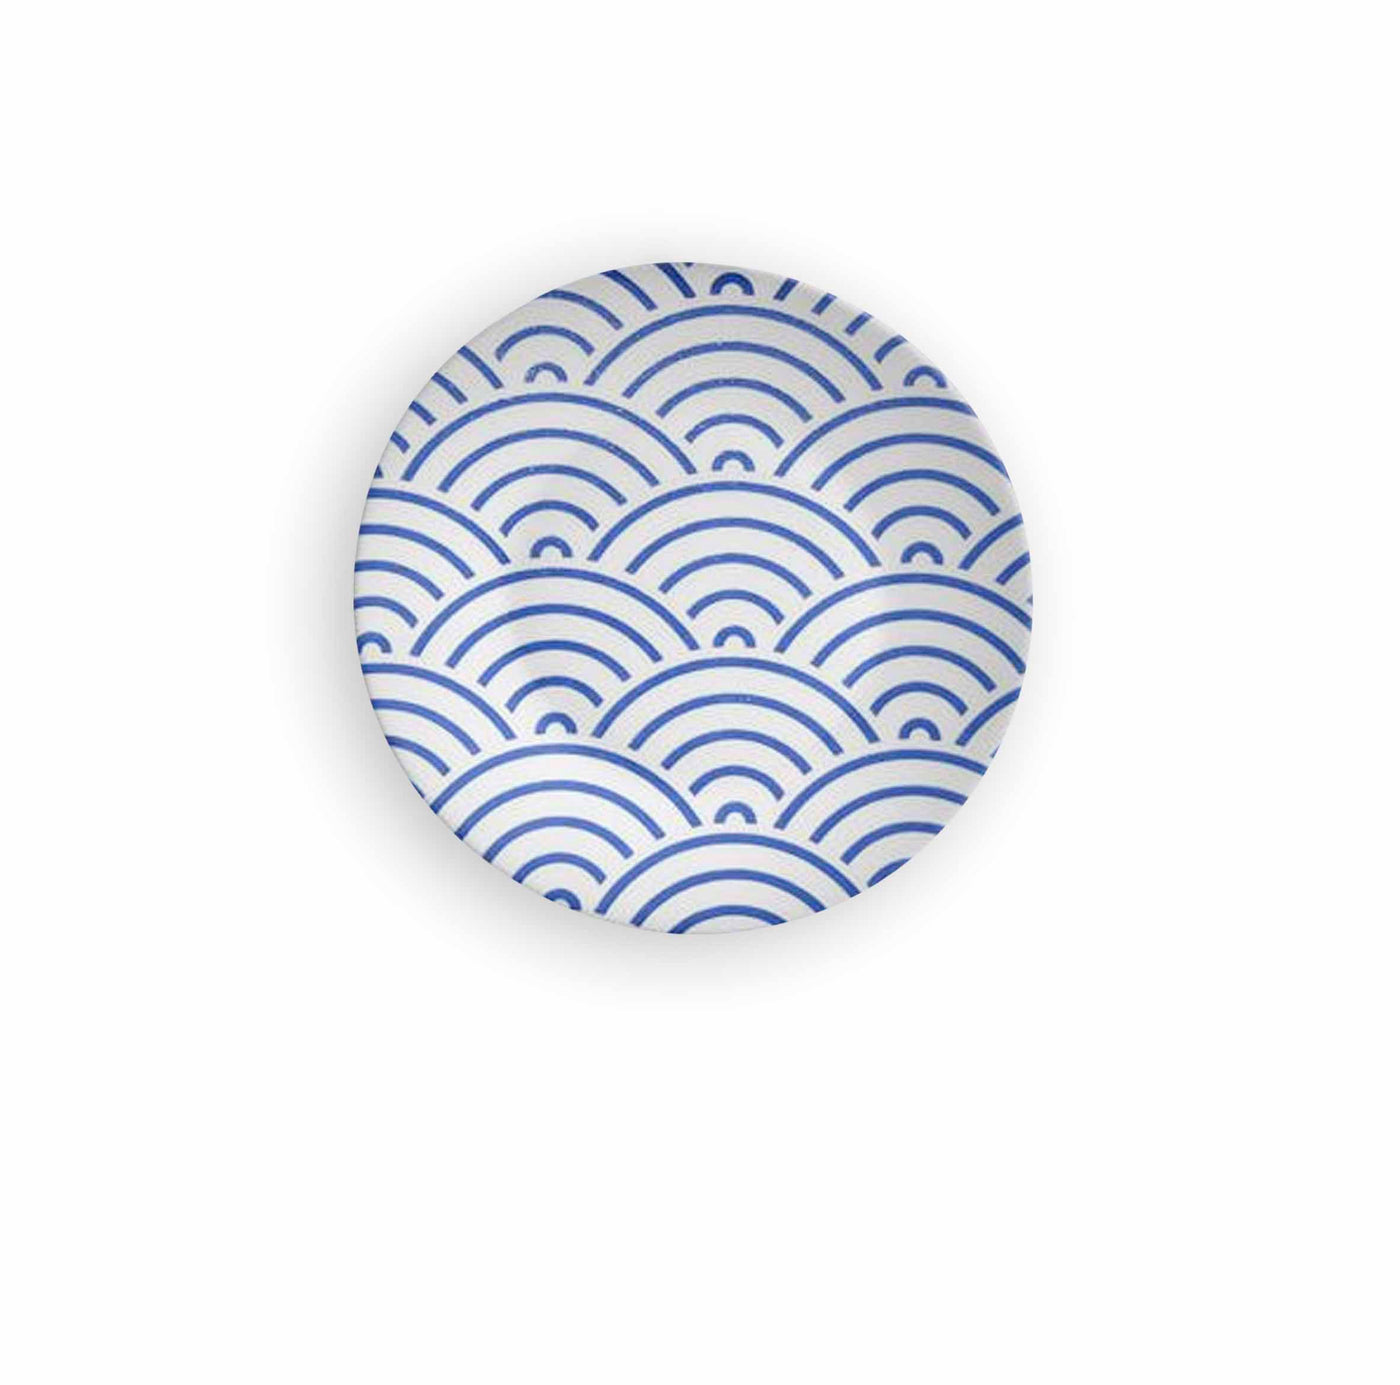 Turkish Within the Blues Decorative Wall Plate - Wall Decor - 2